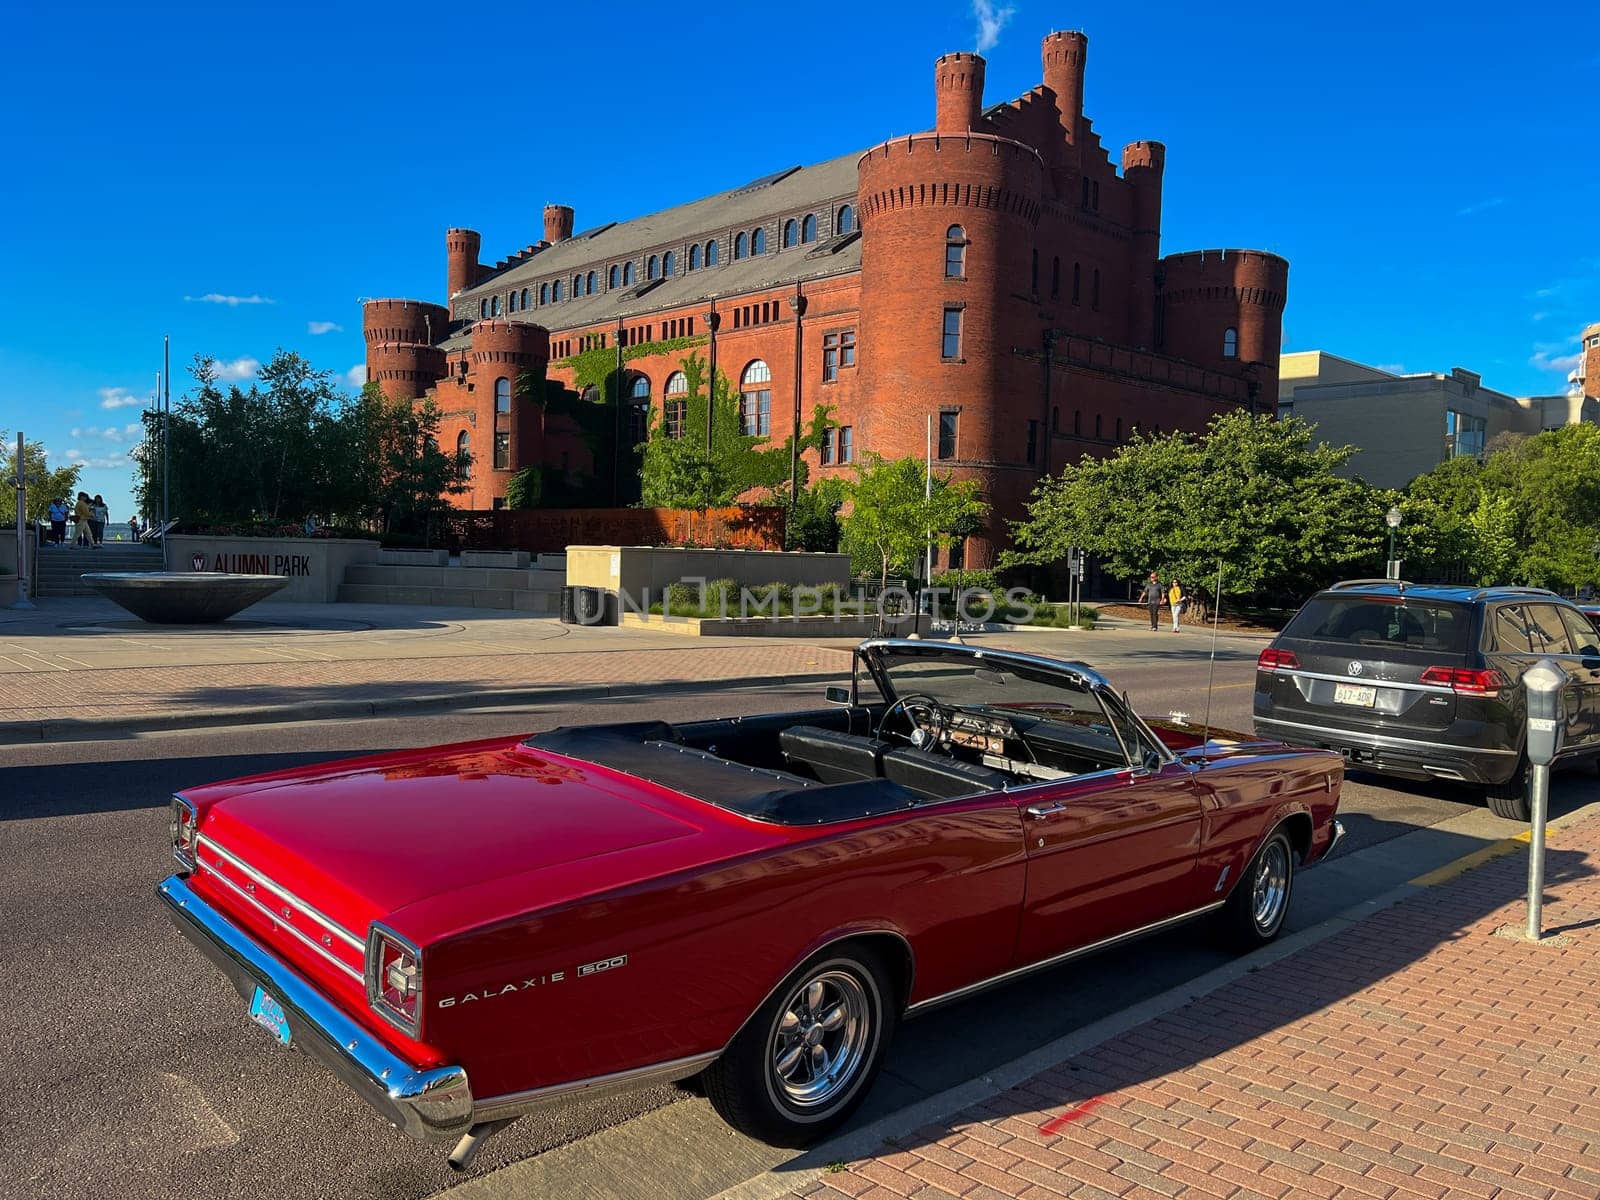 MADISON, WISCONSIN, JULY 14 2022: Ford Galaxie 500 with background of Wisconsin State University old stye building in the city with a blue sky summer background. High QUality Image.